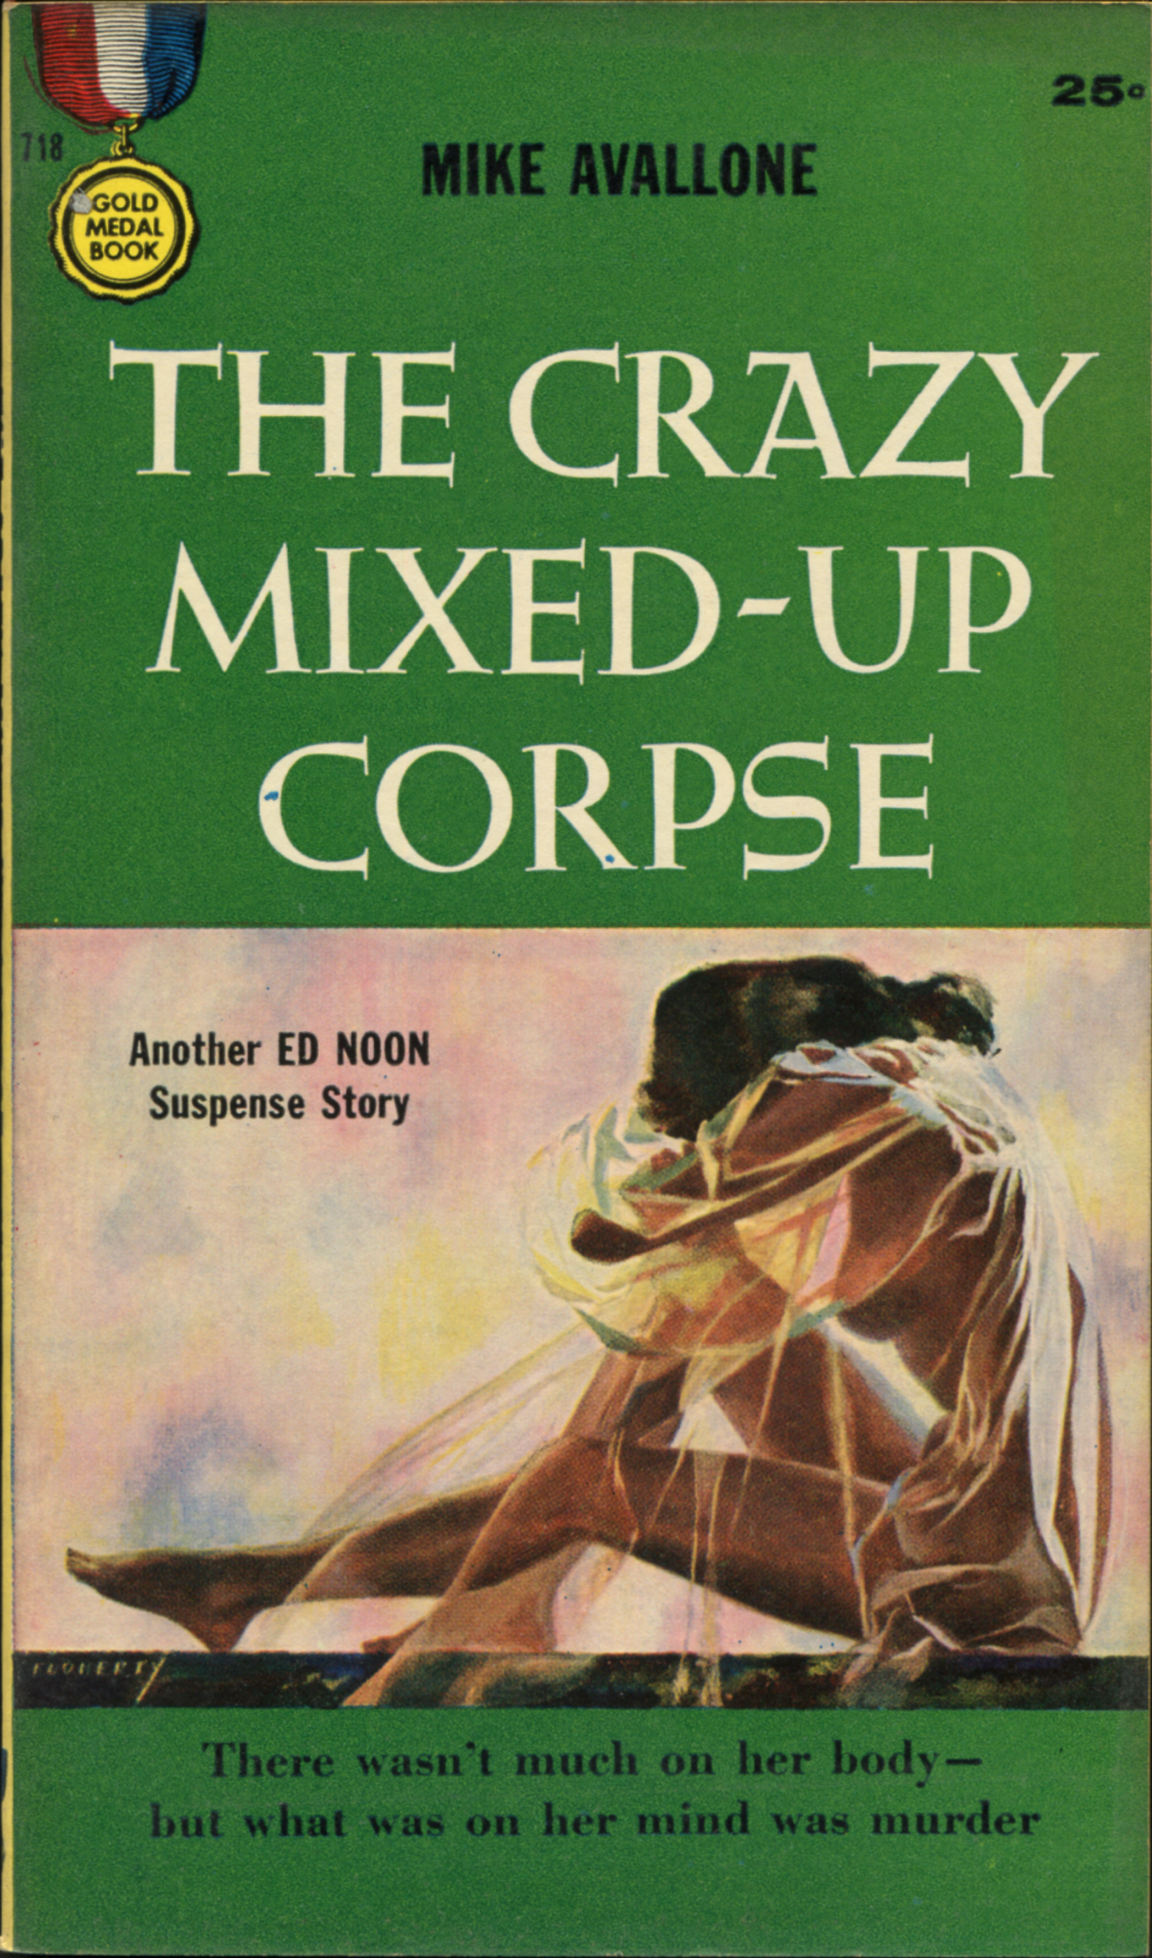 51407869457-The Crazy Mixed-Up Corpse. Gold Medal, 1957